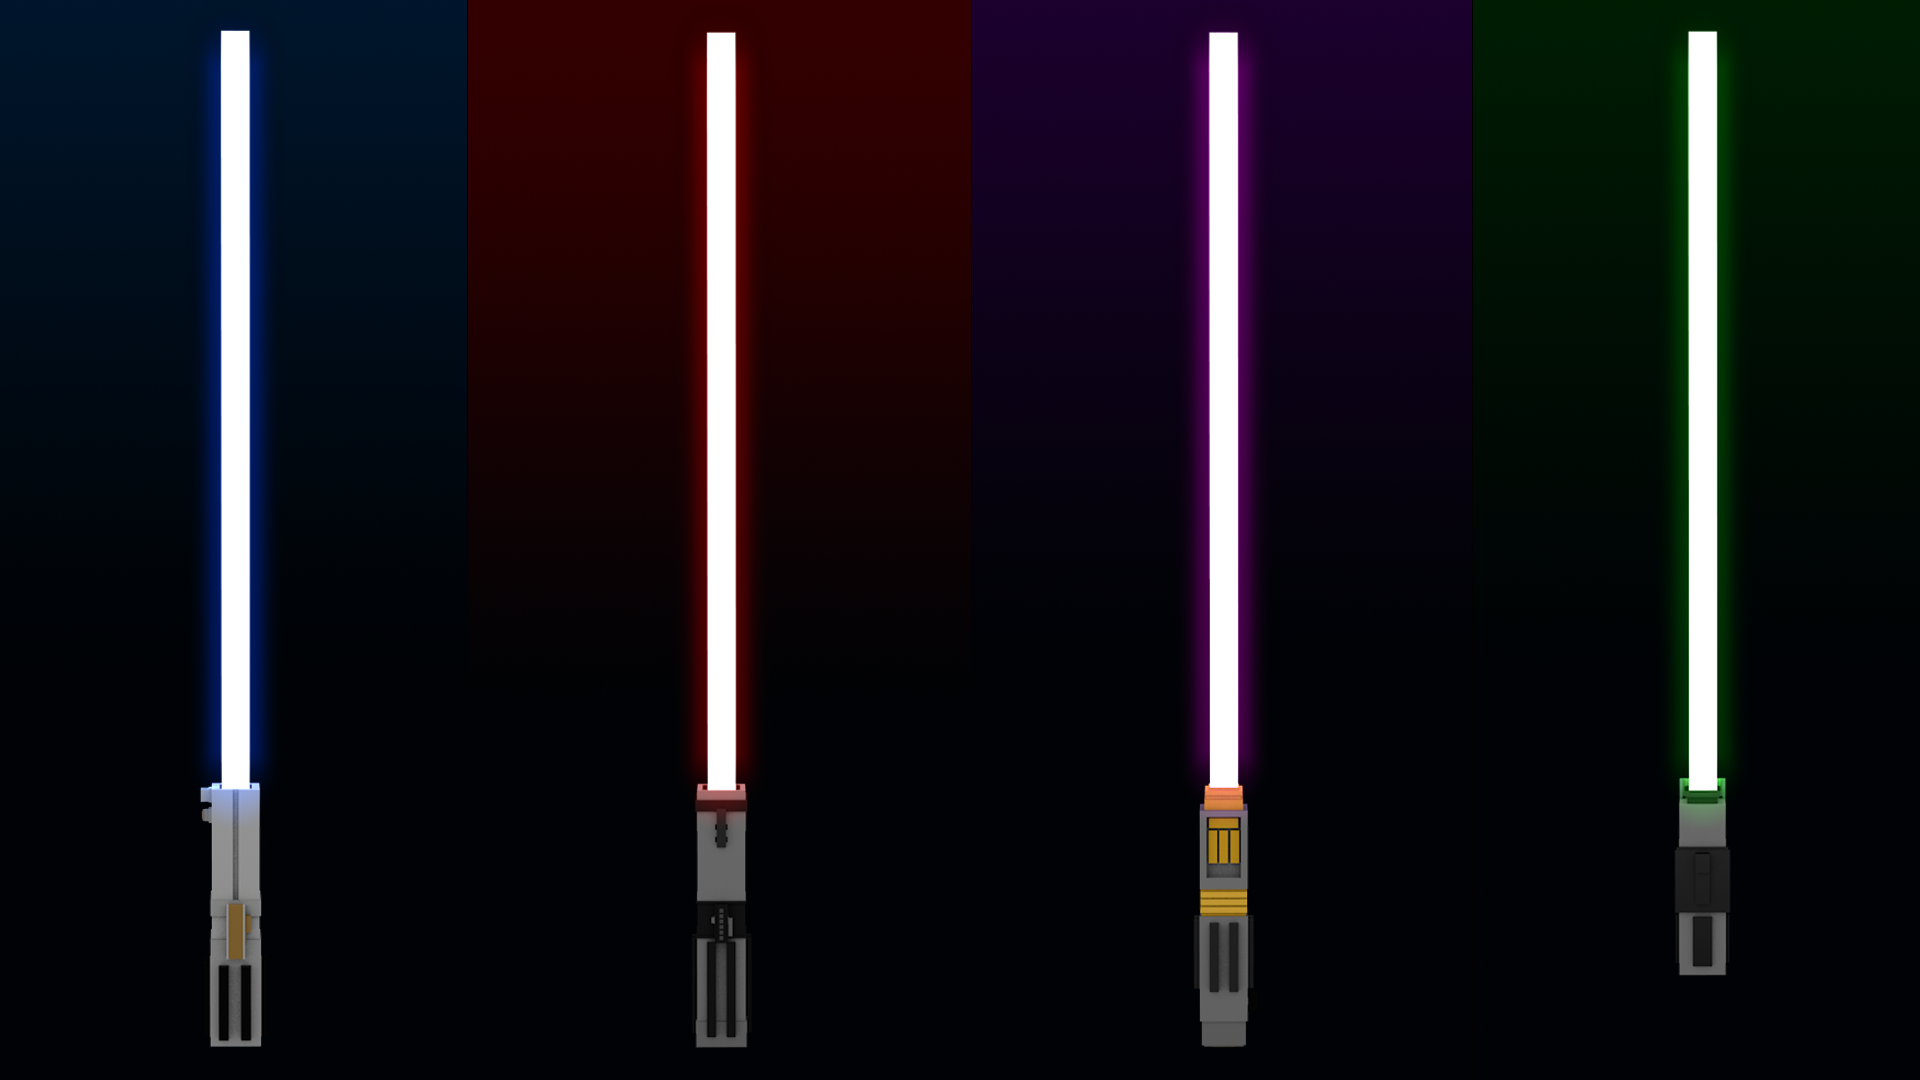 Blue Red Purple And Green Minecraft Lightsabers By Nicknufayl On